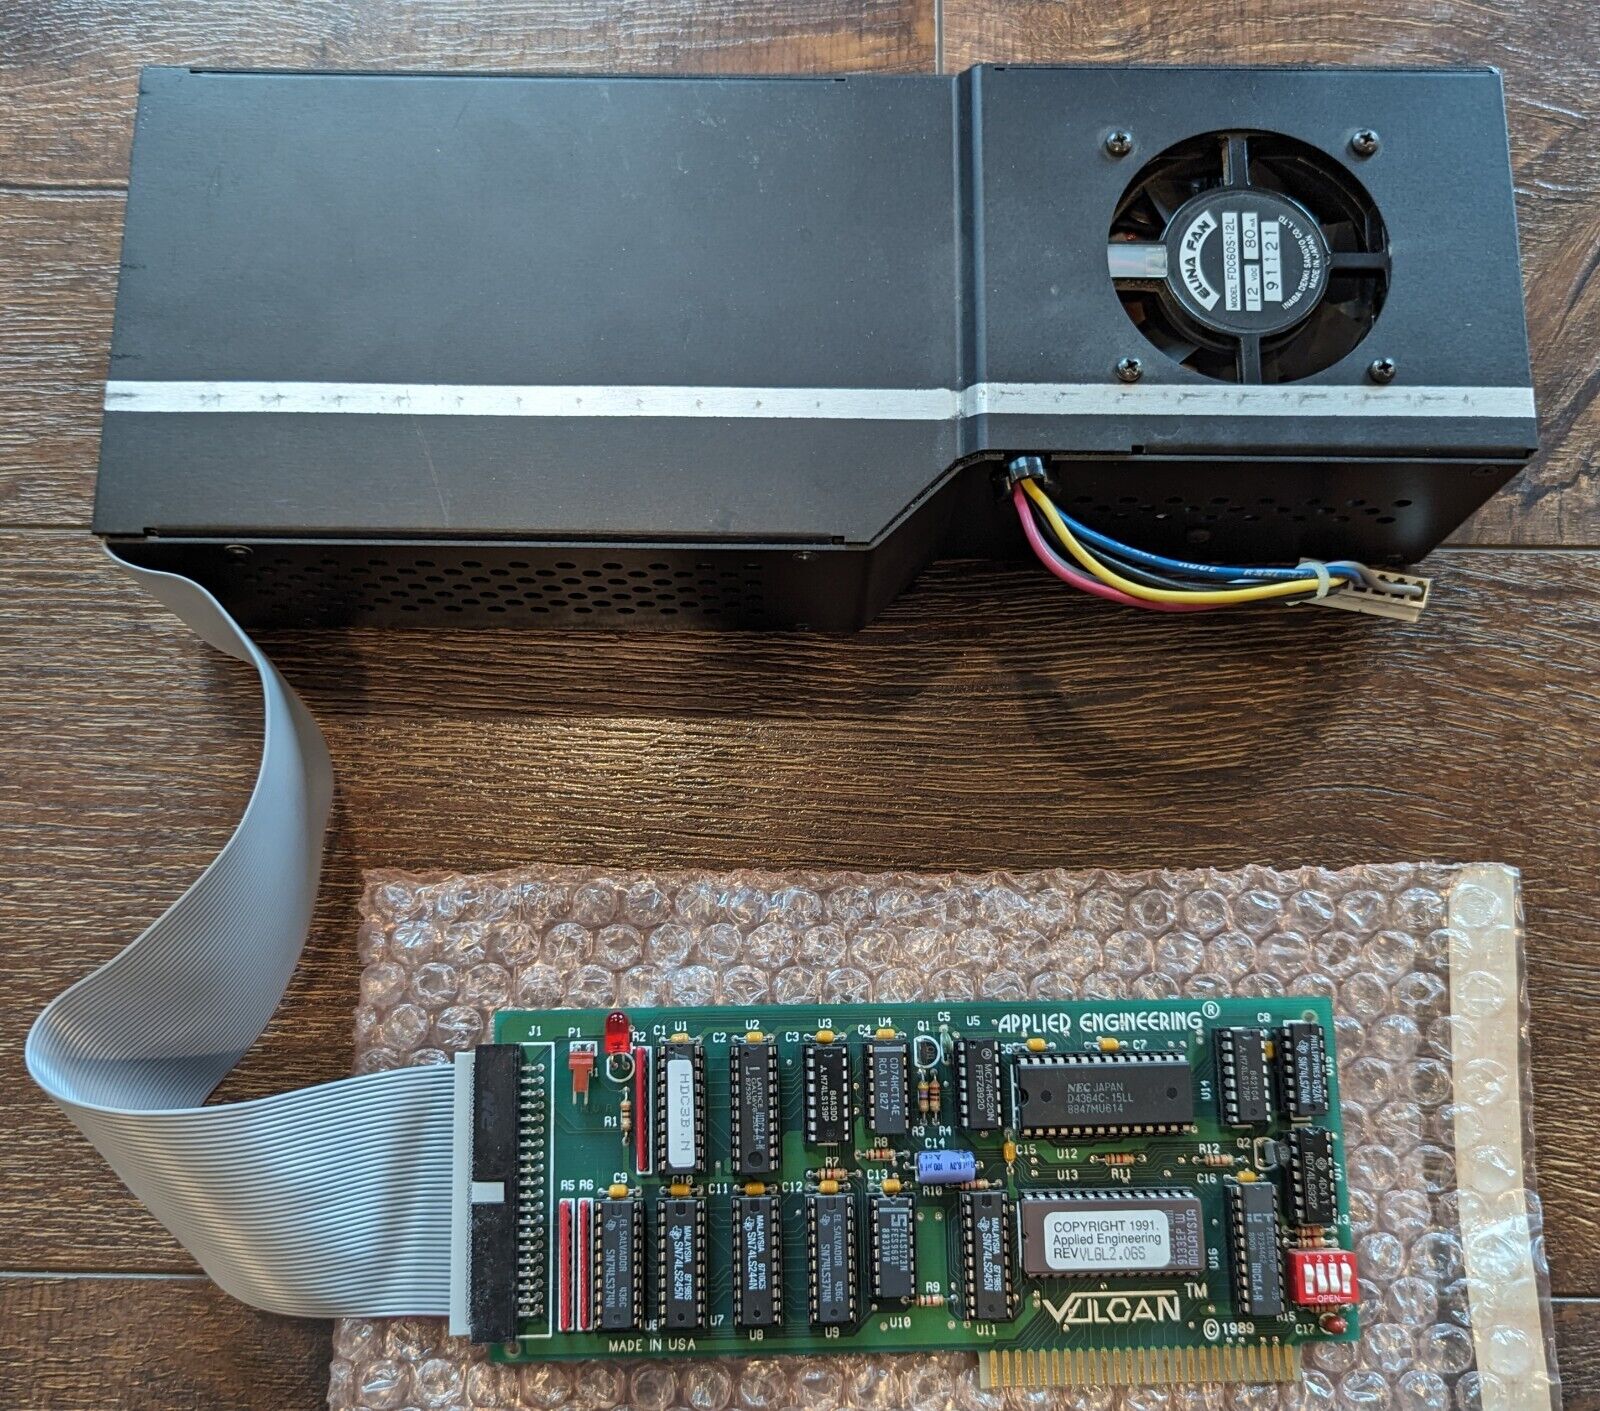 Rare Applied Engineering Vulcan 20 MB Harddrive and Power Supply for Apple IIgs